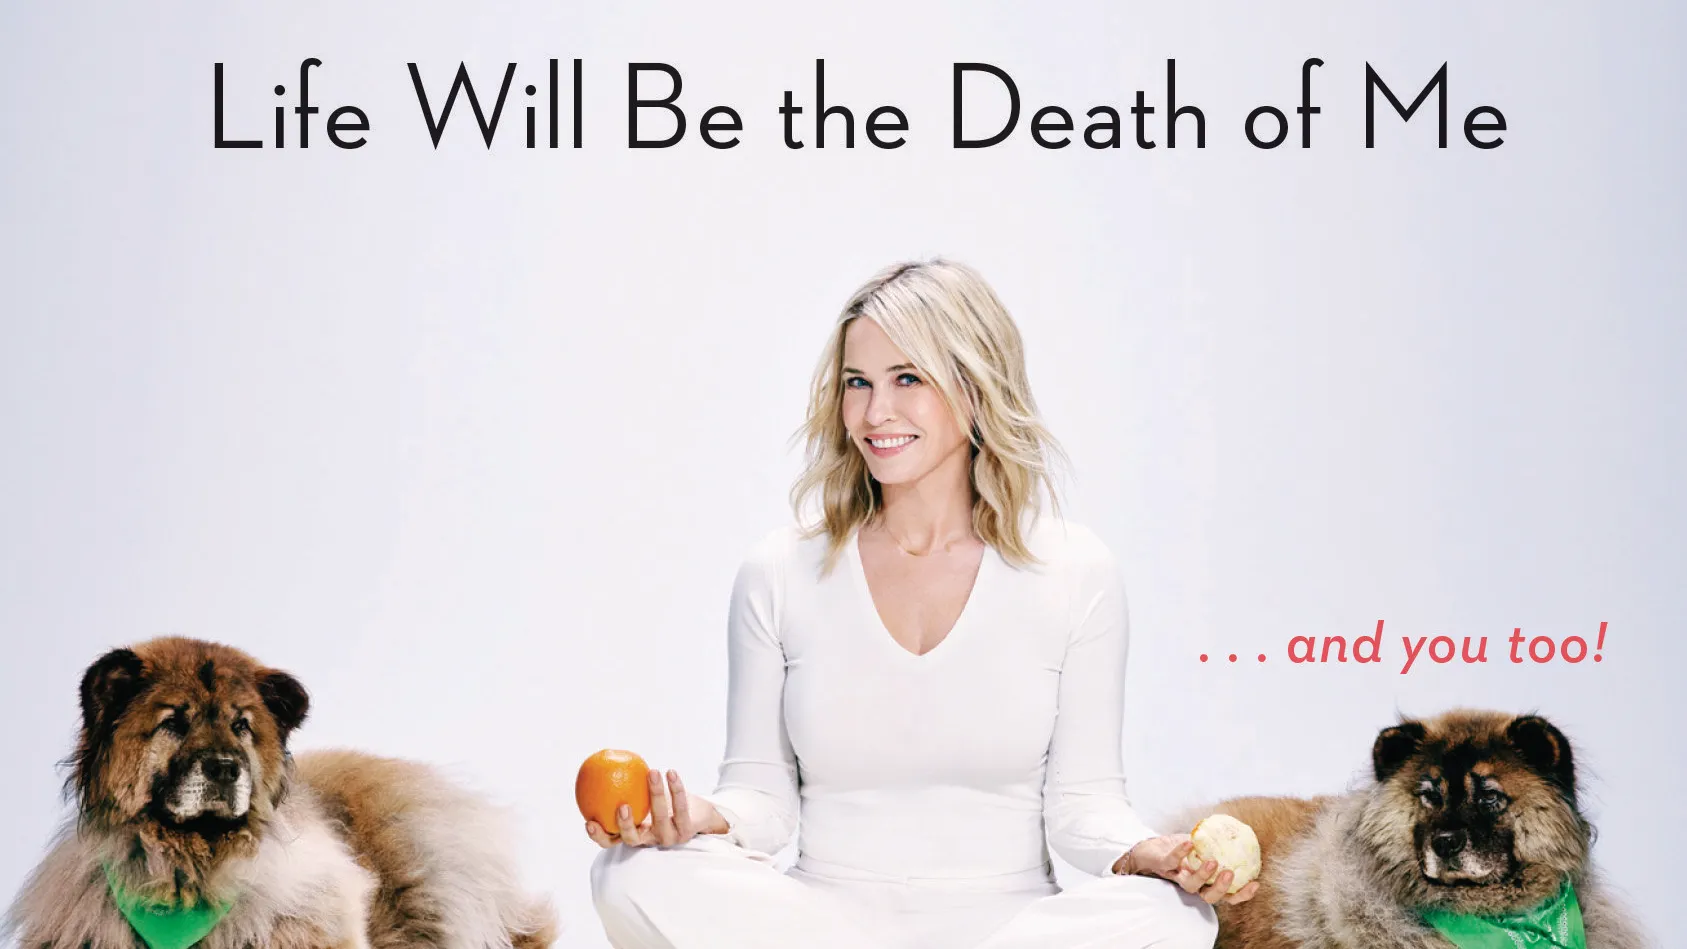 Chelsea Handler on the cover of the book 'Life Will Be the Death of Me'